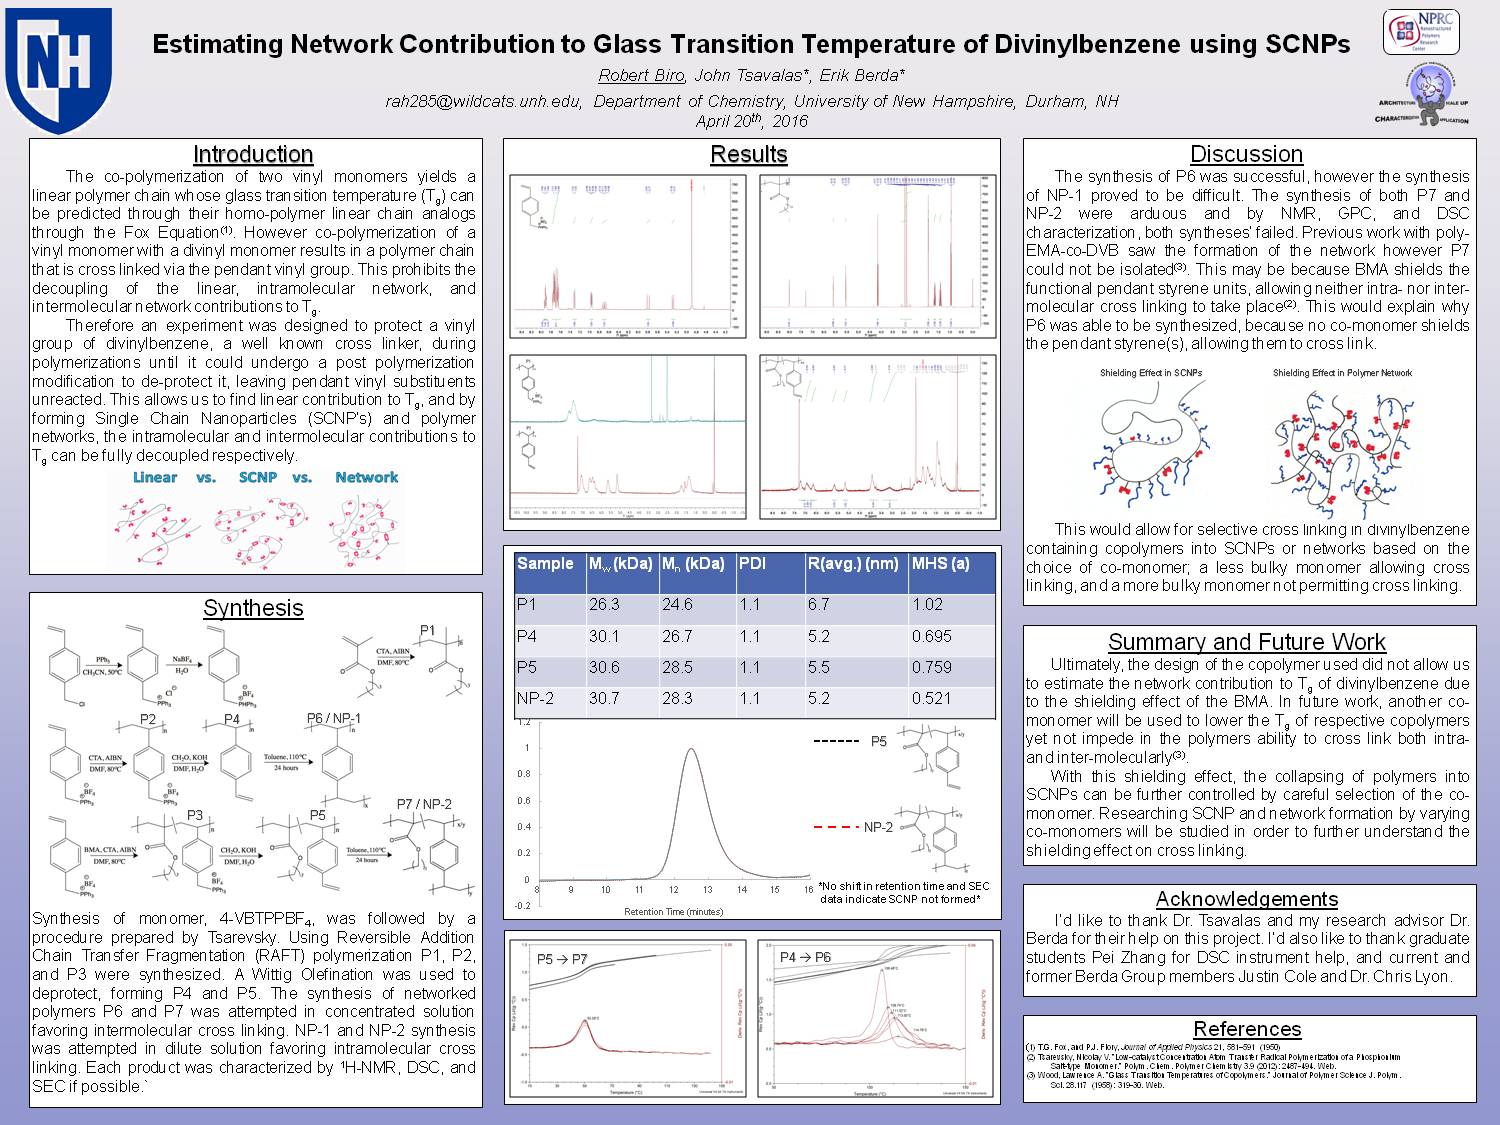 Estimating Network Contribution To Glass Transition Temperature Of Divinyibenzene Using Scnps by rah285